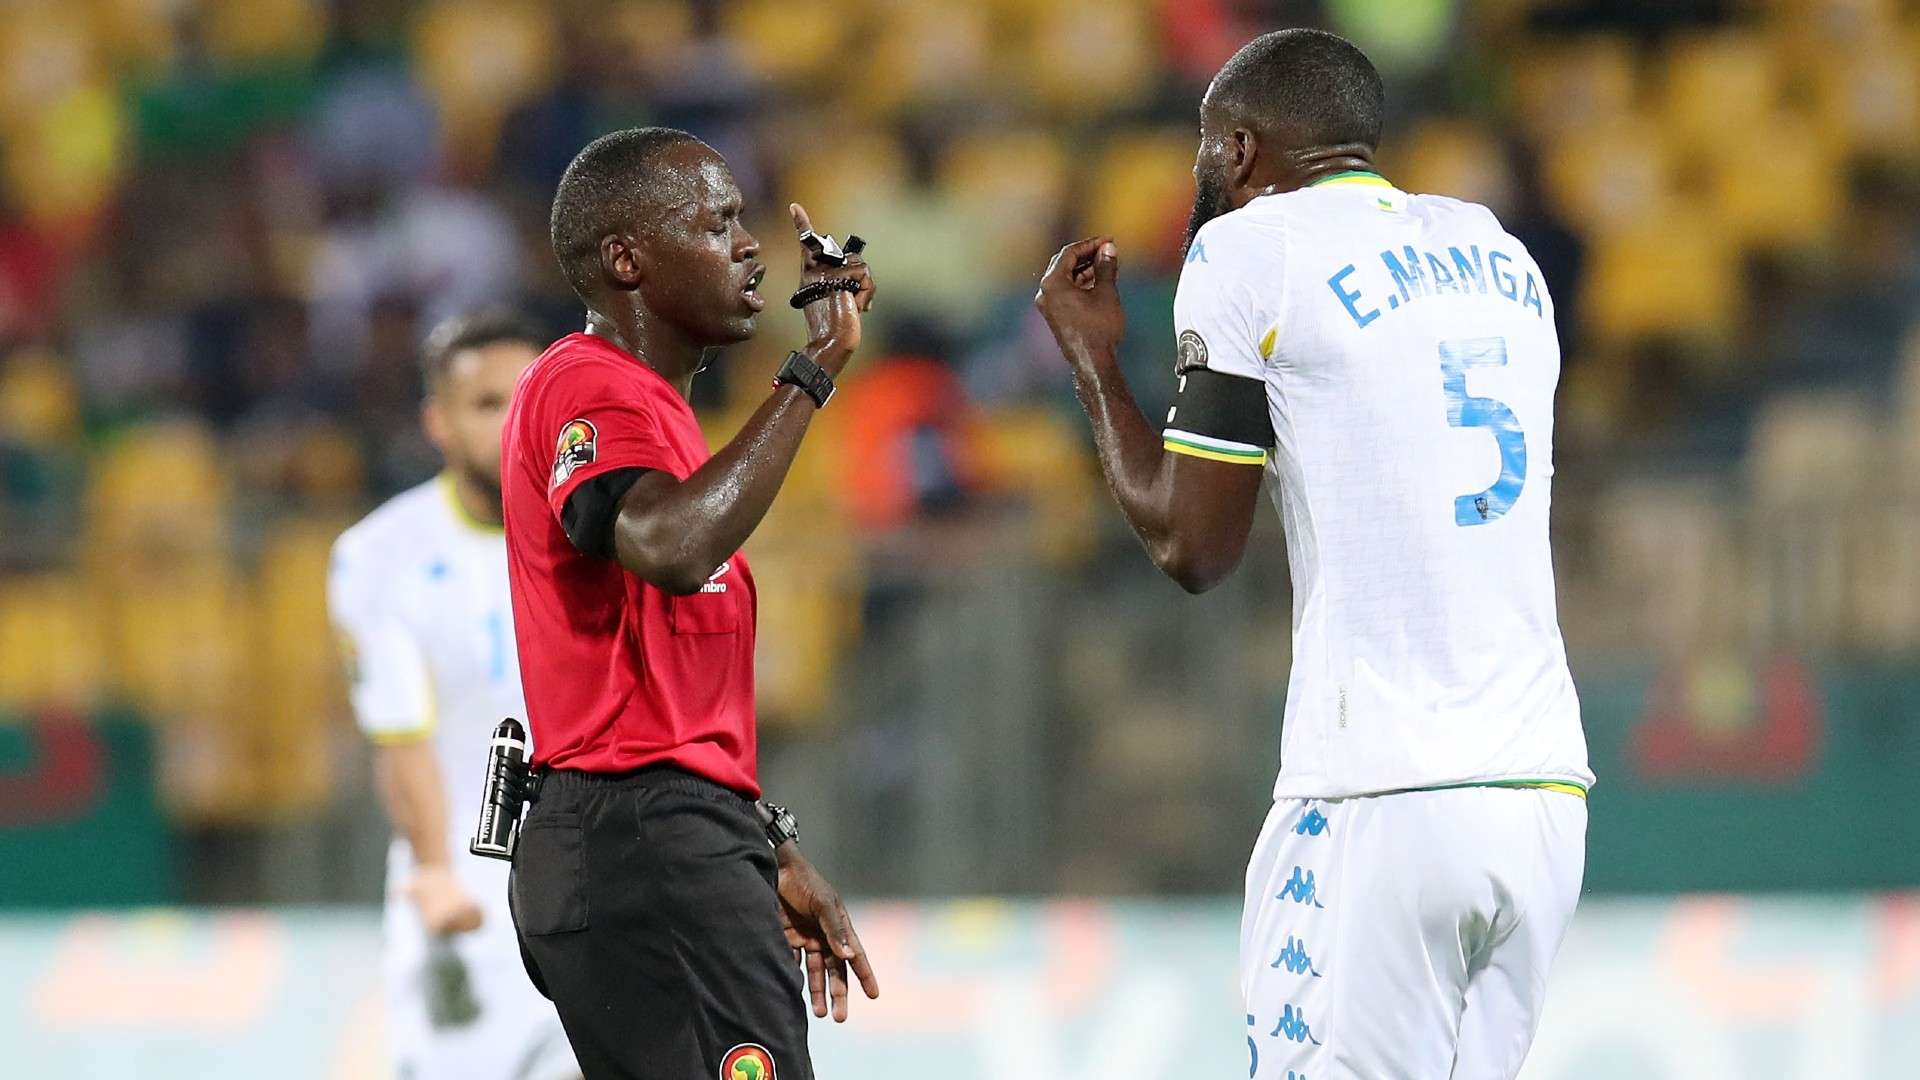 Kenya's Referee, Peter Waweru Kamaku during the 2021 Africa Cup of Nations Afcon Finals.